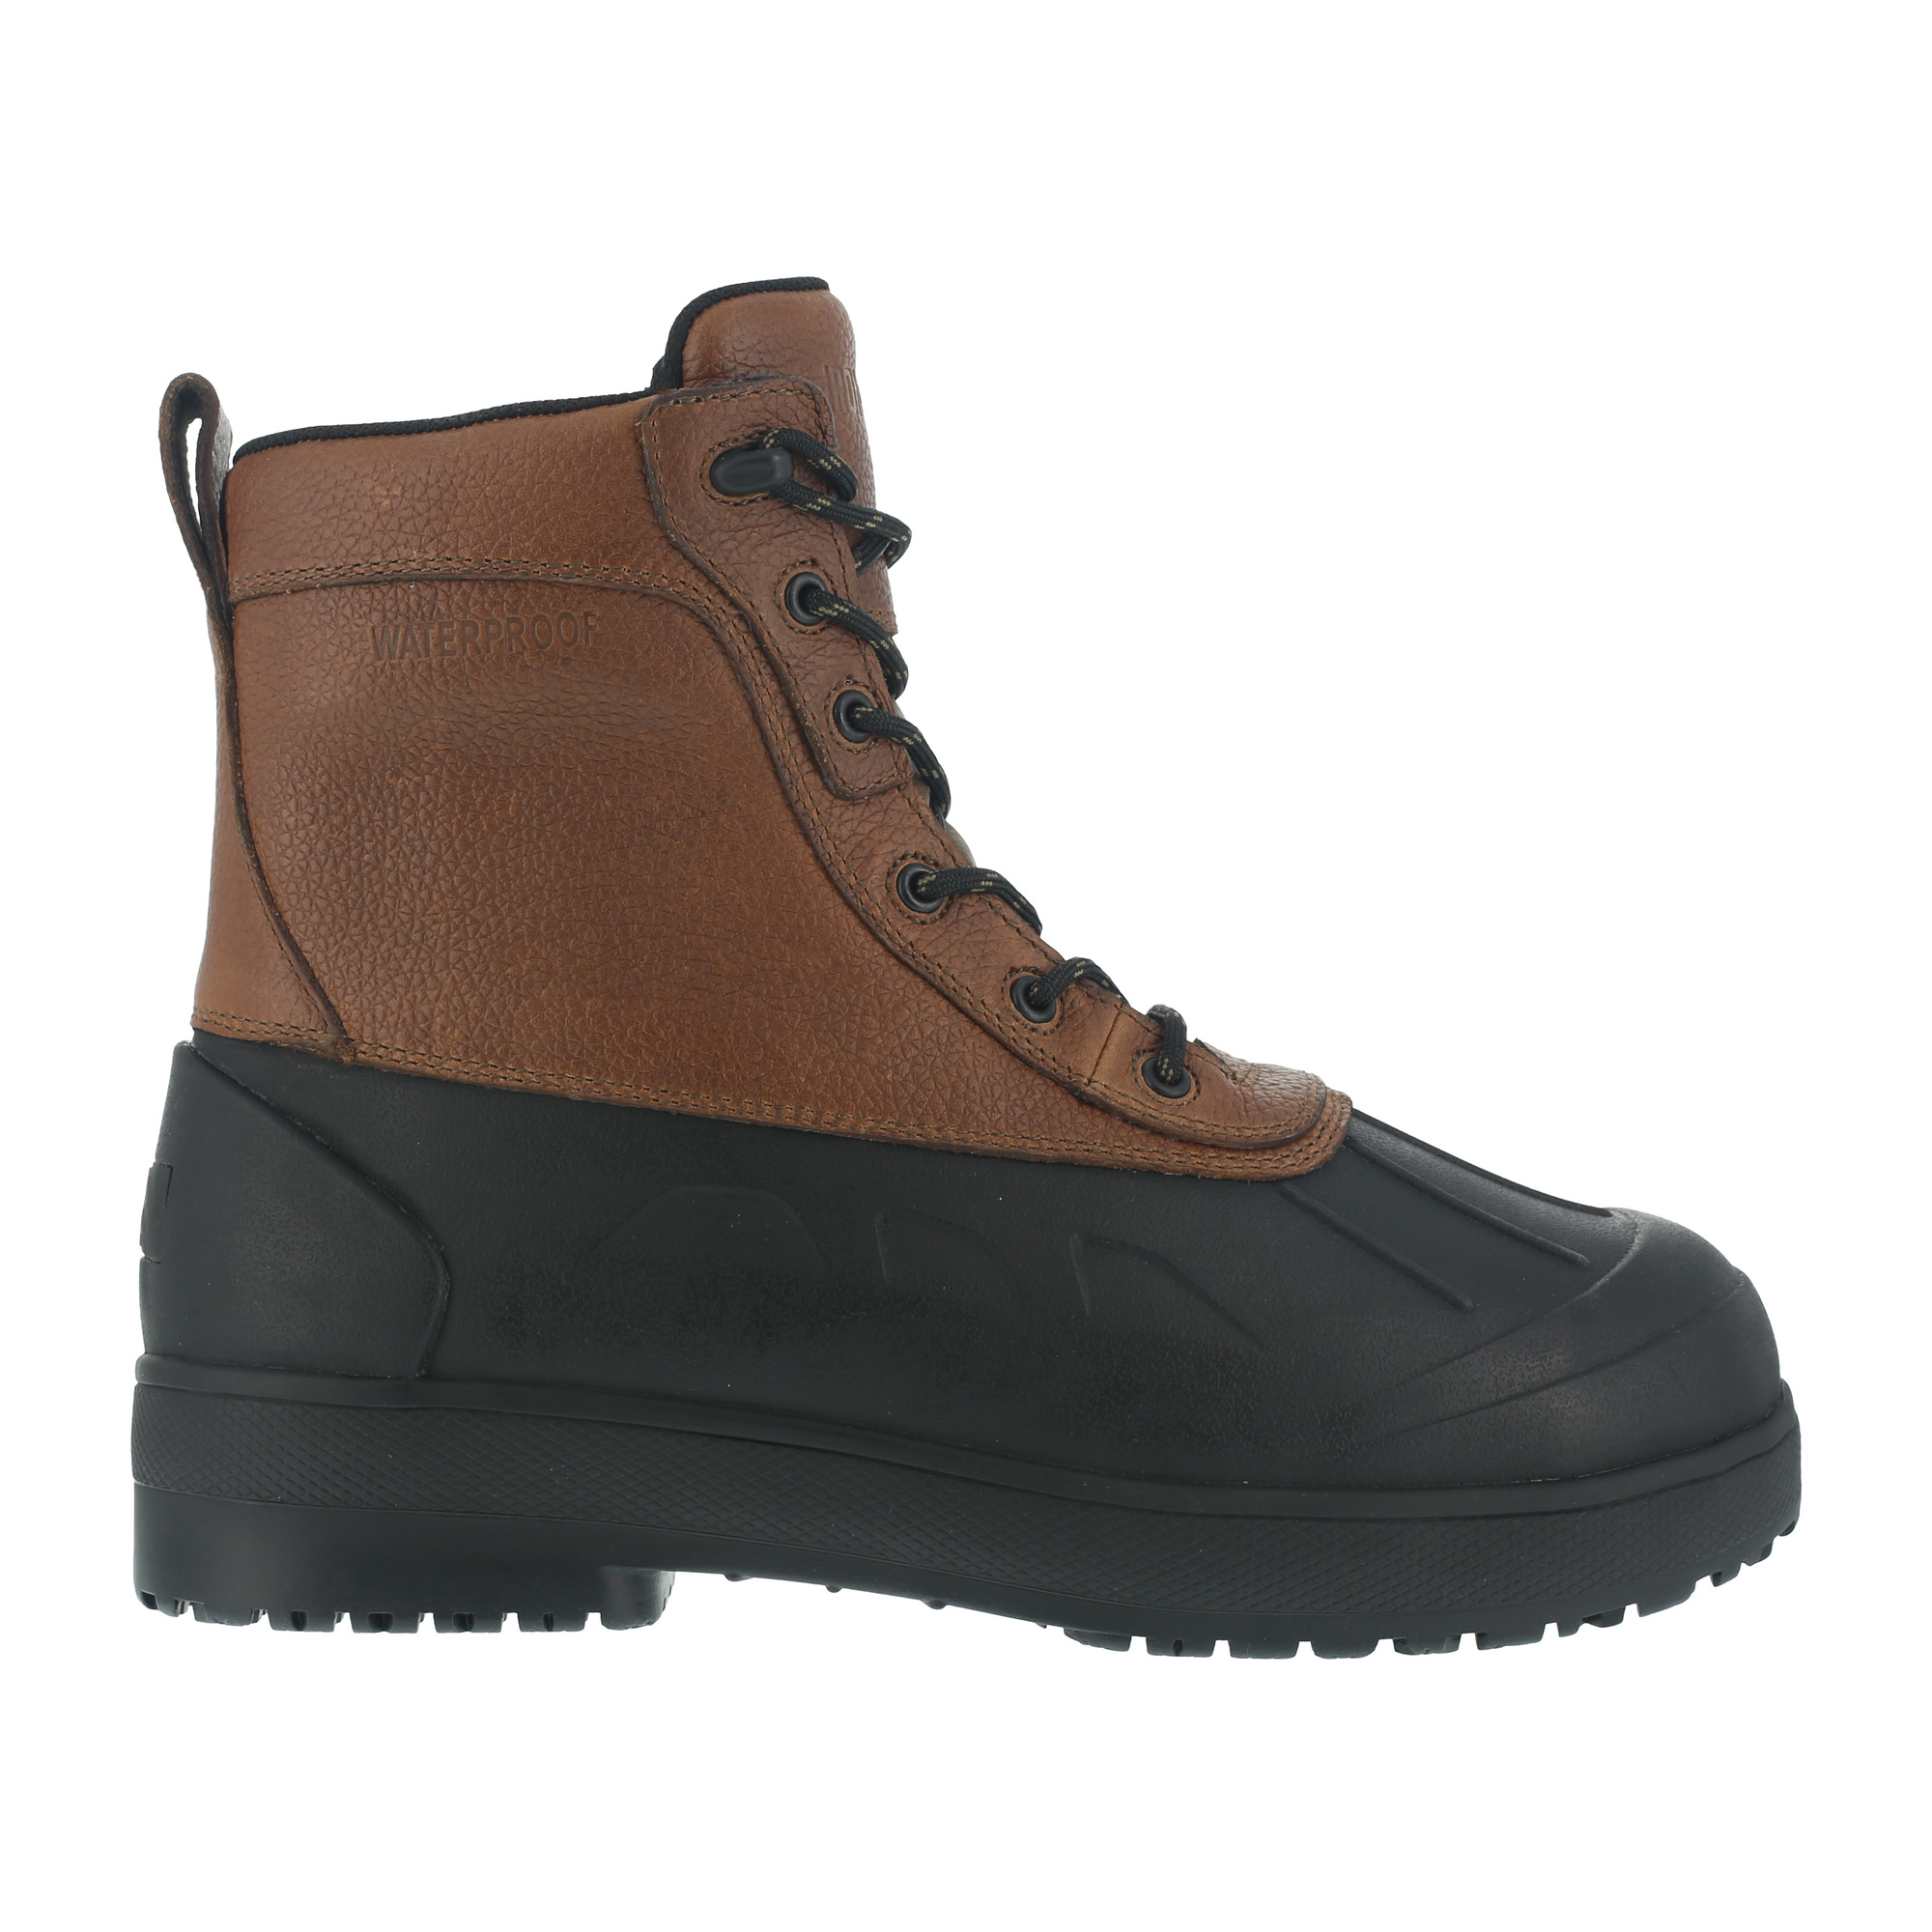 Iron Age, Rubber Vamp and Leather Shaft Waterproof Work Boot, Size 9, Width Wide, Color Black and Brown, Model IA965